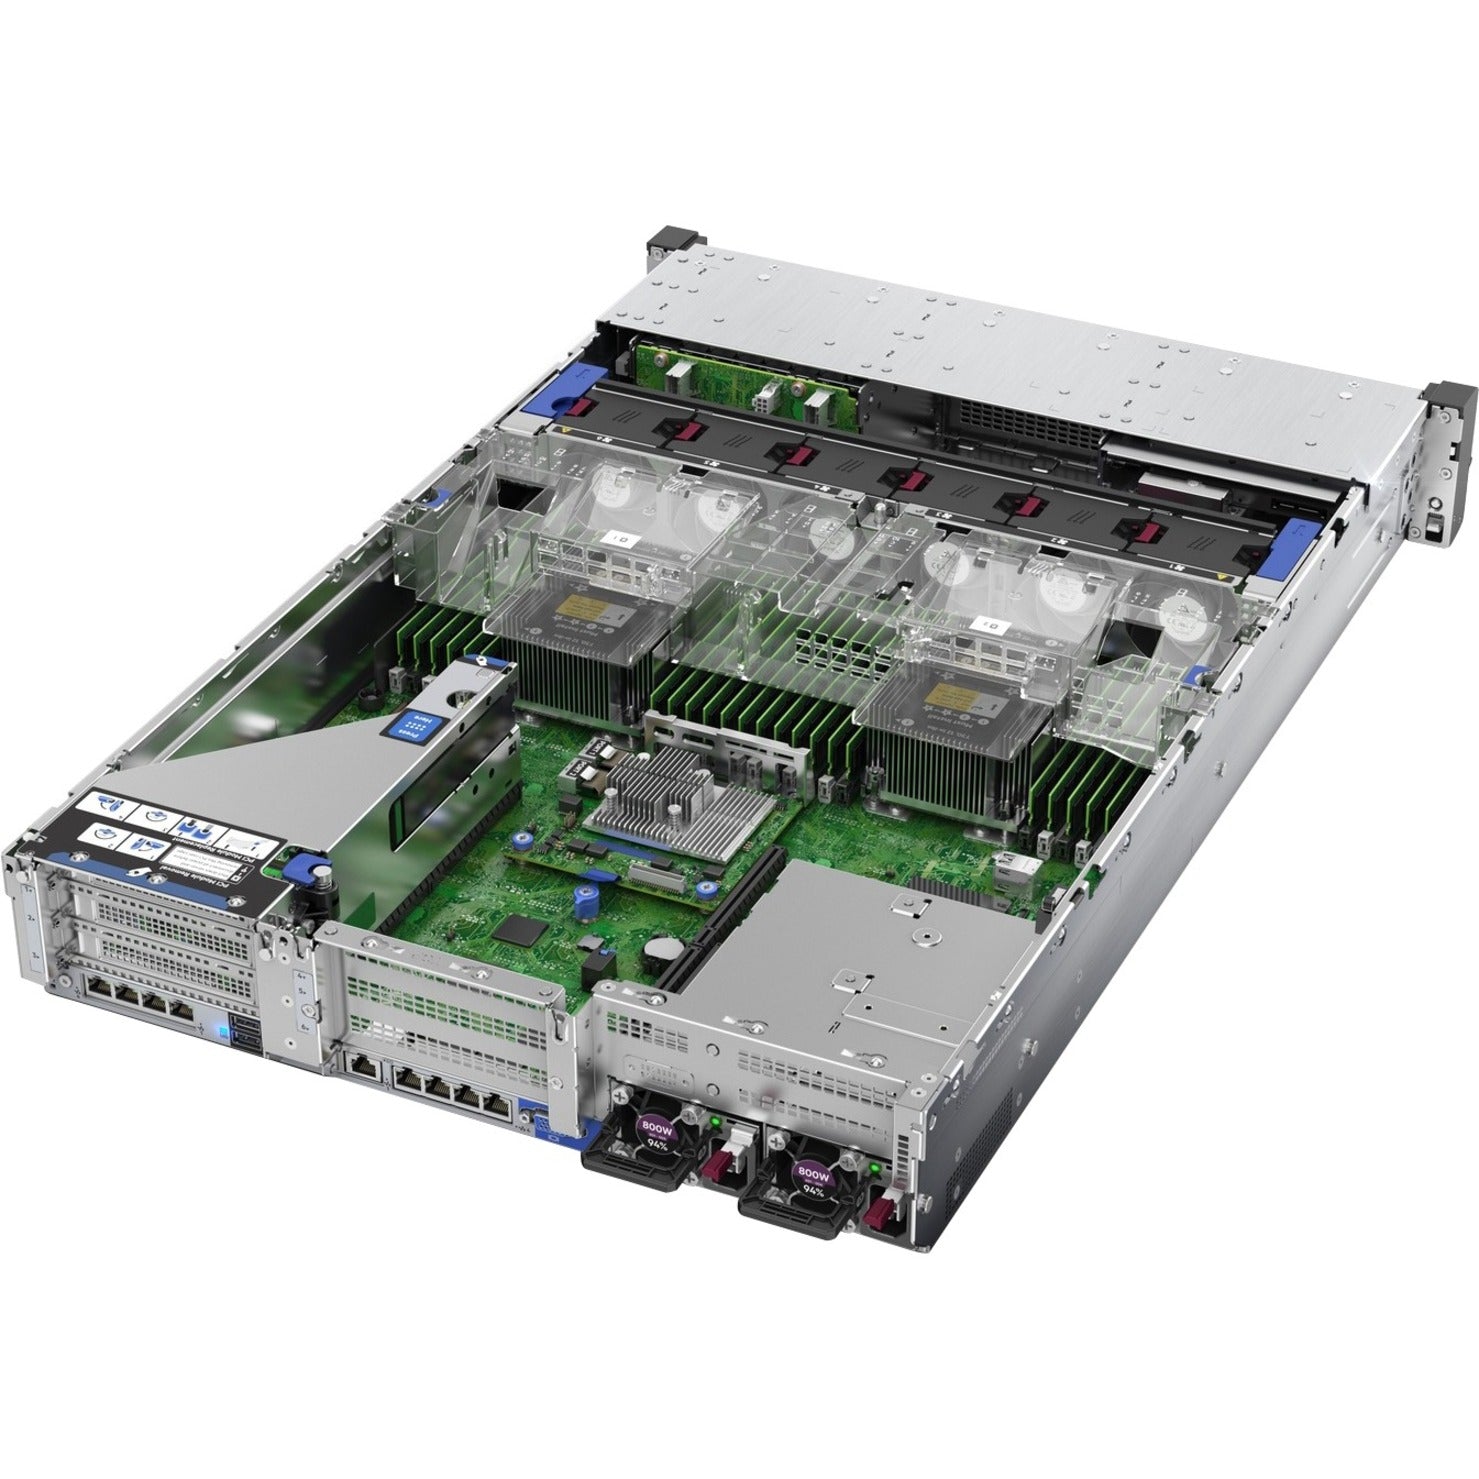 HPE P24849-B21 ProLiant DL380 Gen10 6248R 1P 32GB-R S100i NC 8SFF 800W PS Server, Powerful and Reliable Rack Server for Your Business